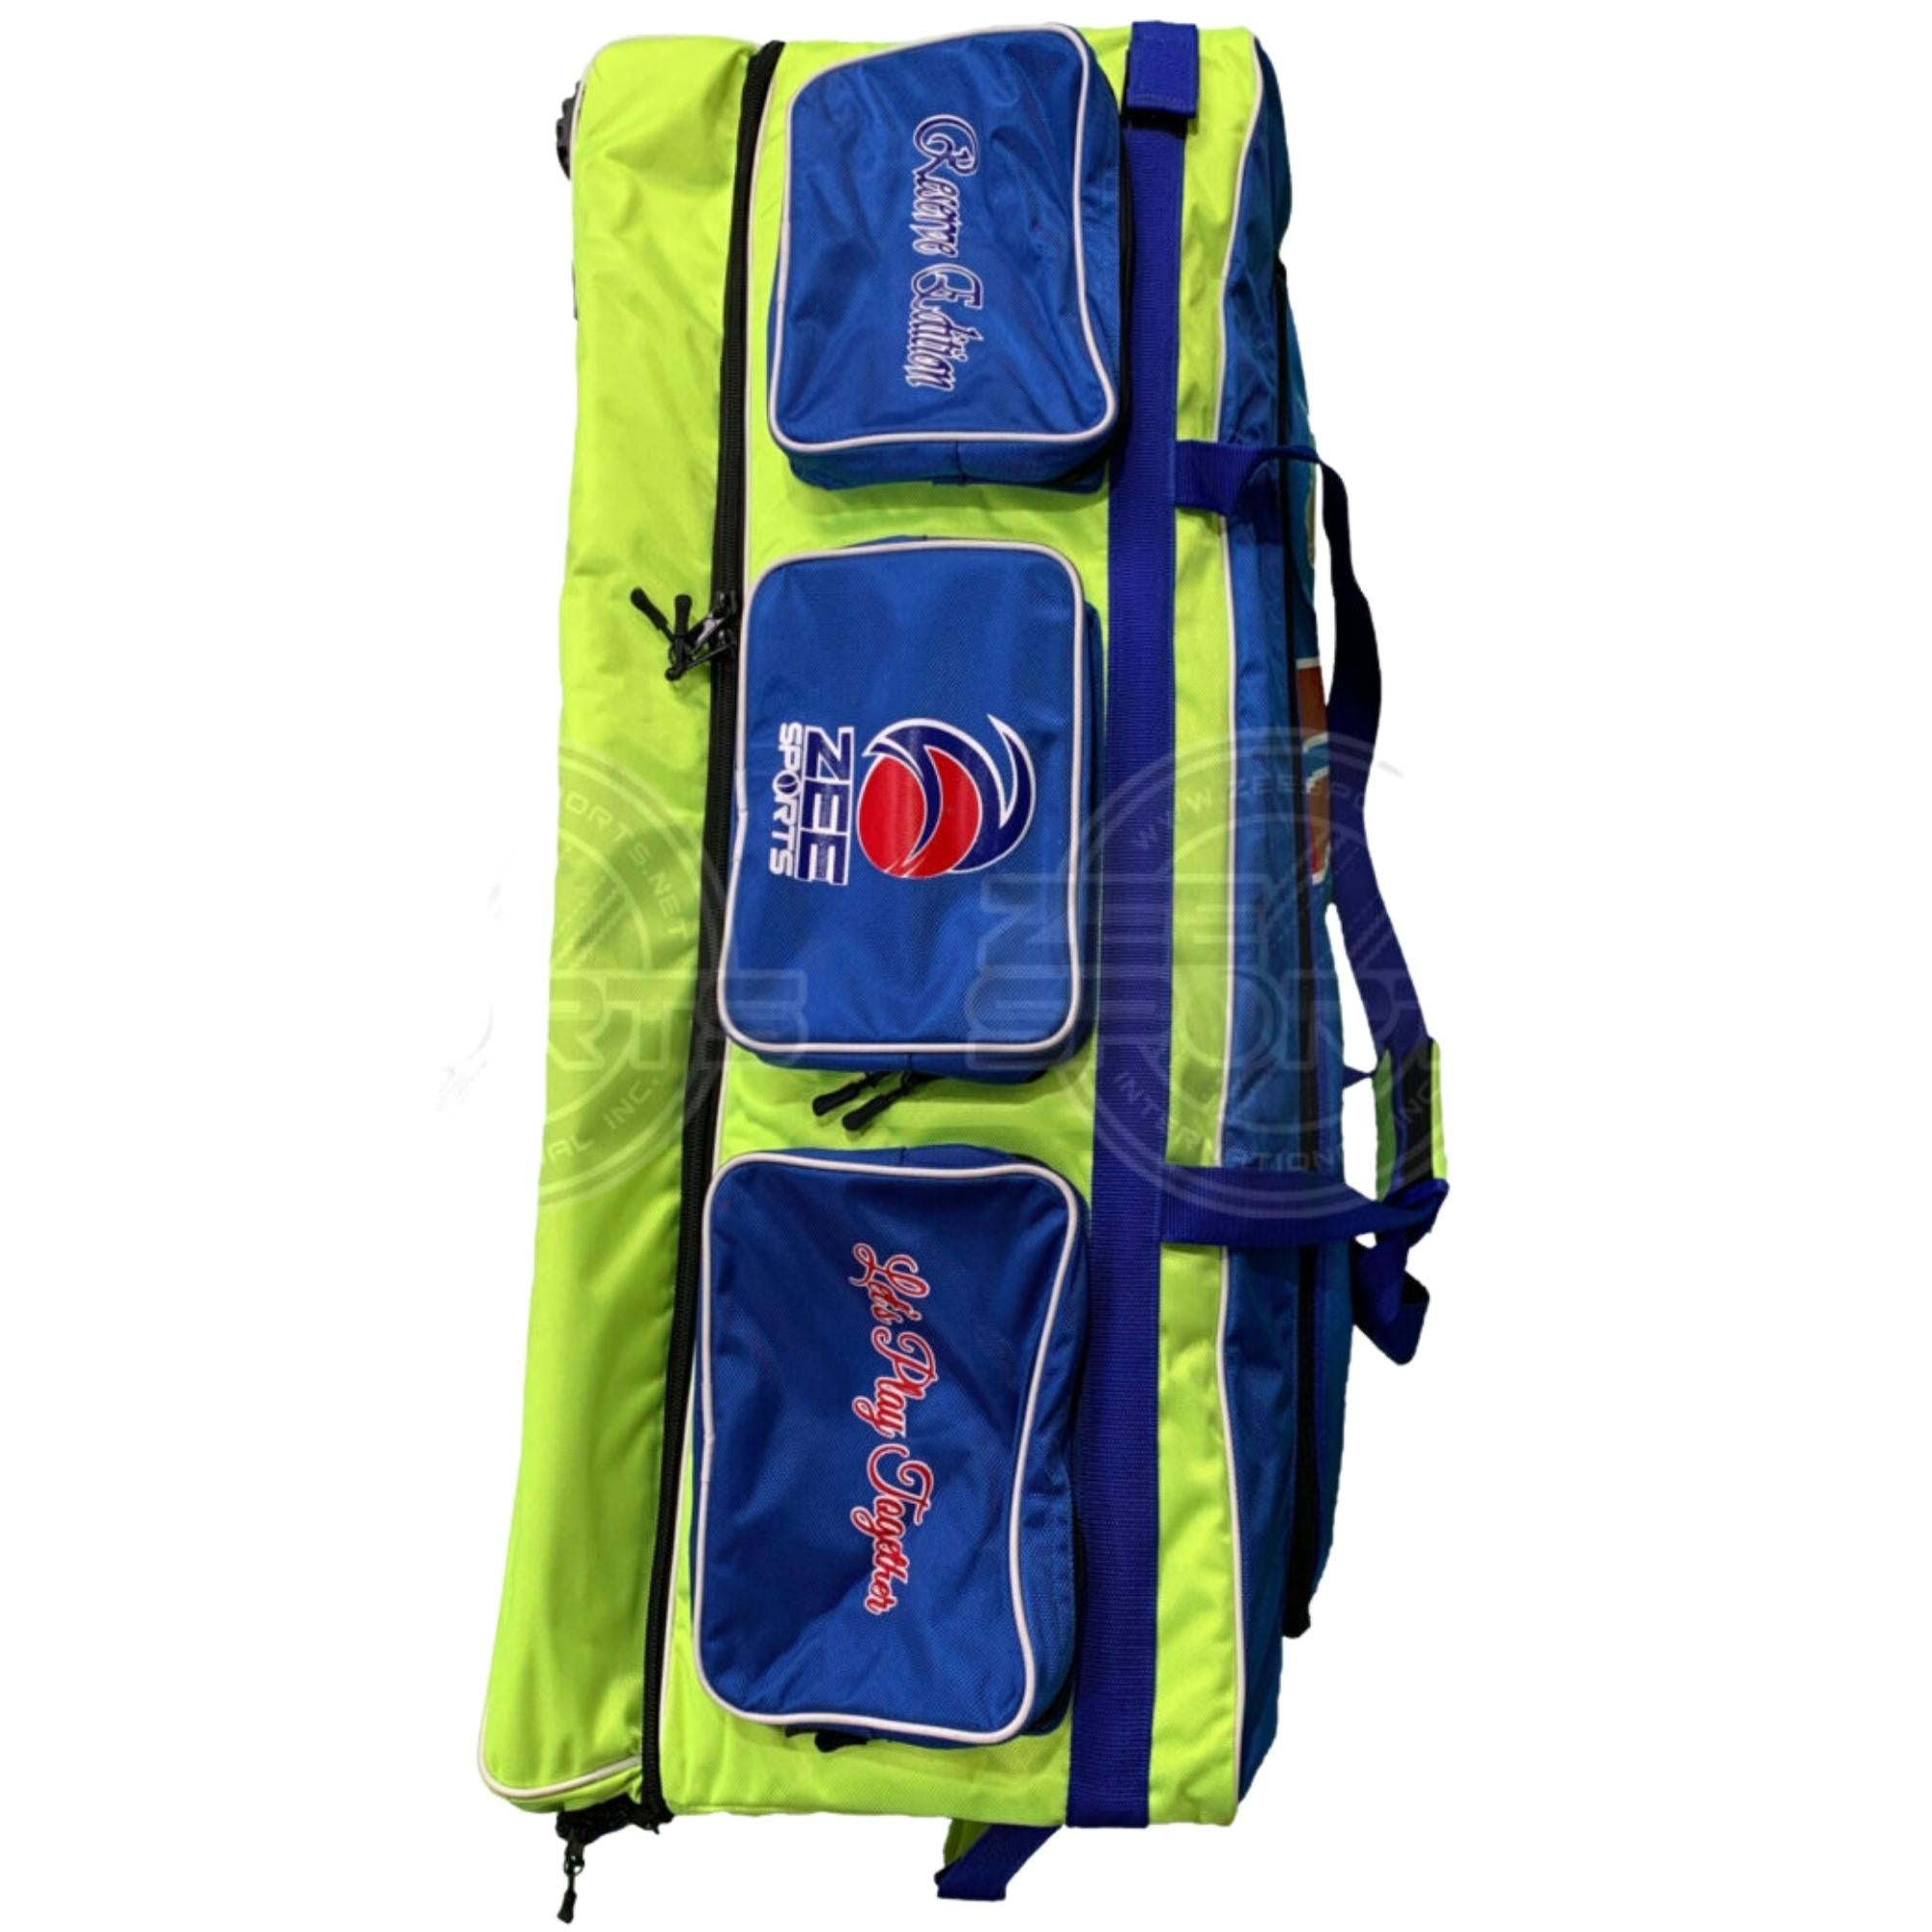 Zee Sports Cricket Kit Bag Lime Green with Blue Color Combination Dual Compartment